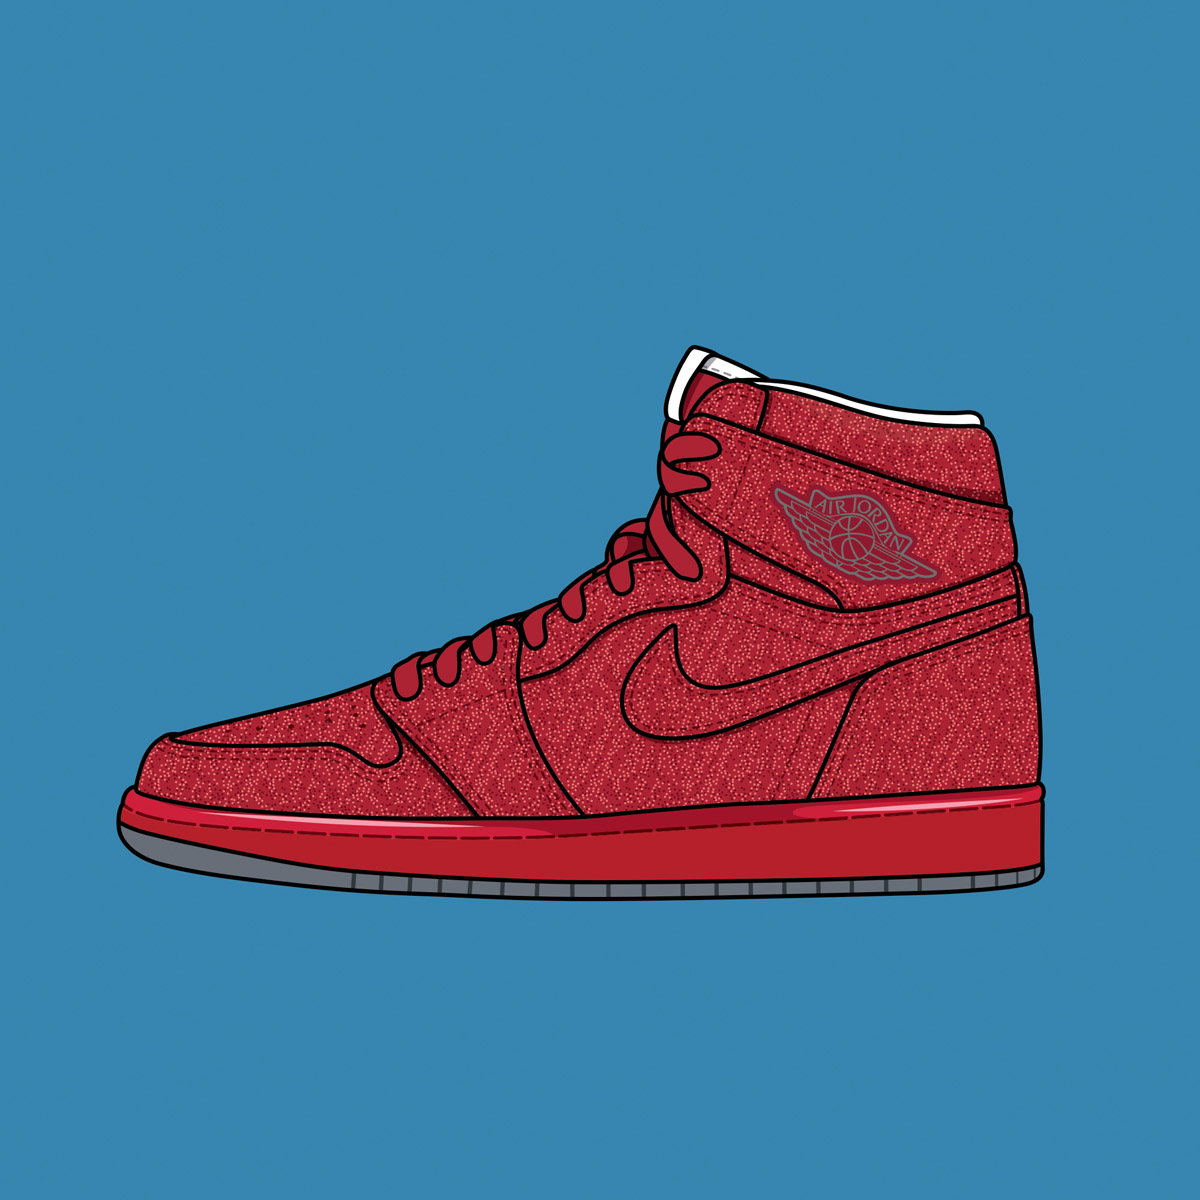 5 most expensive Air Jordan 1 of all time